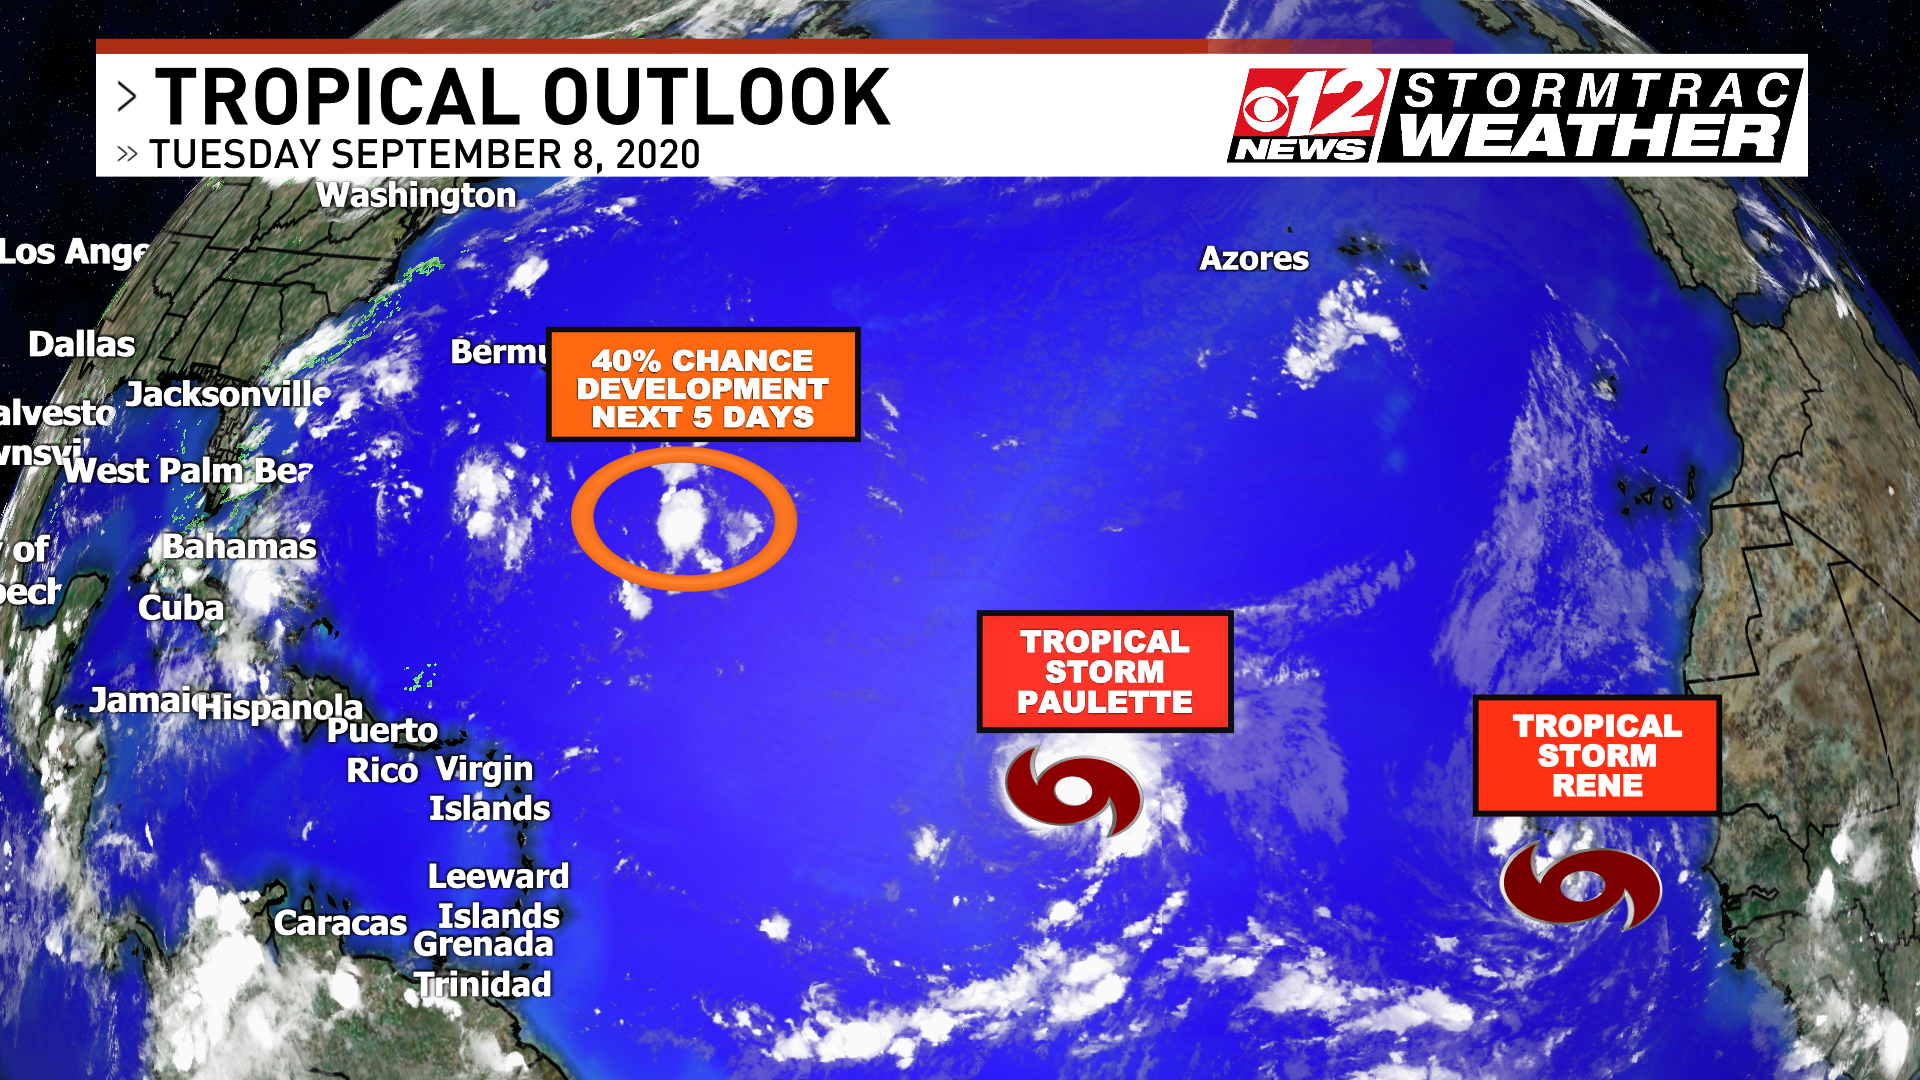 2 Tropical Storms out in the Atlantic, one forecast to a